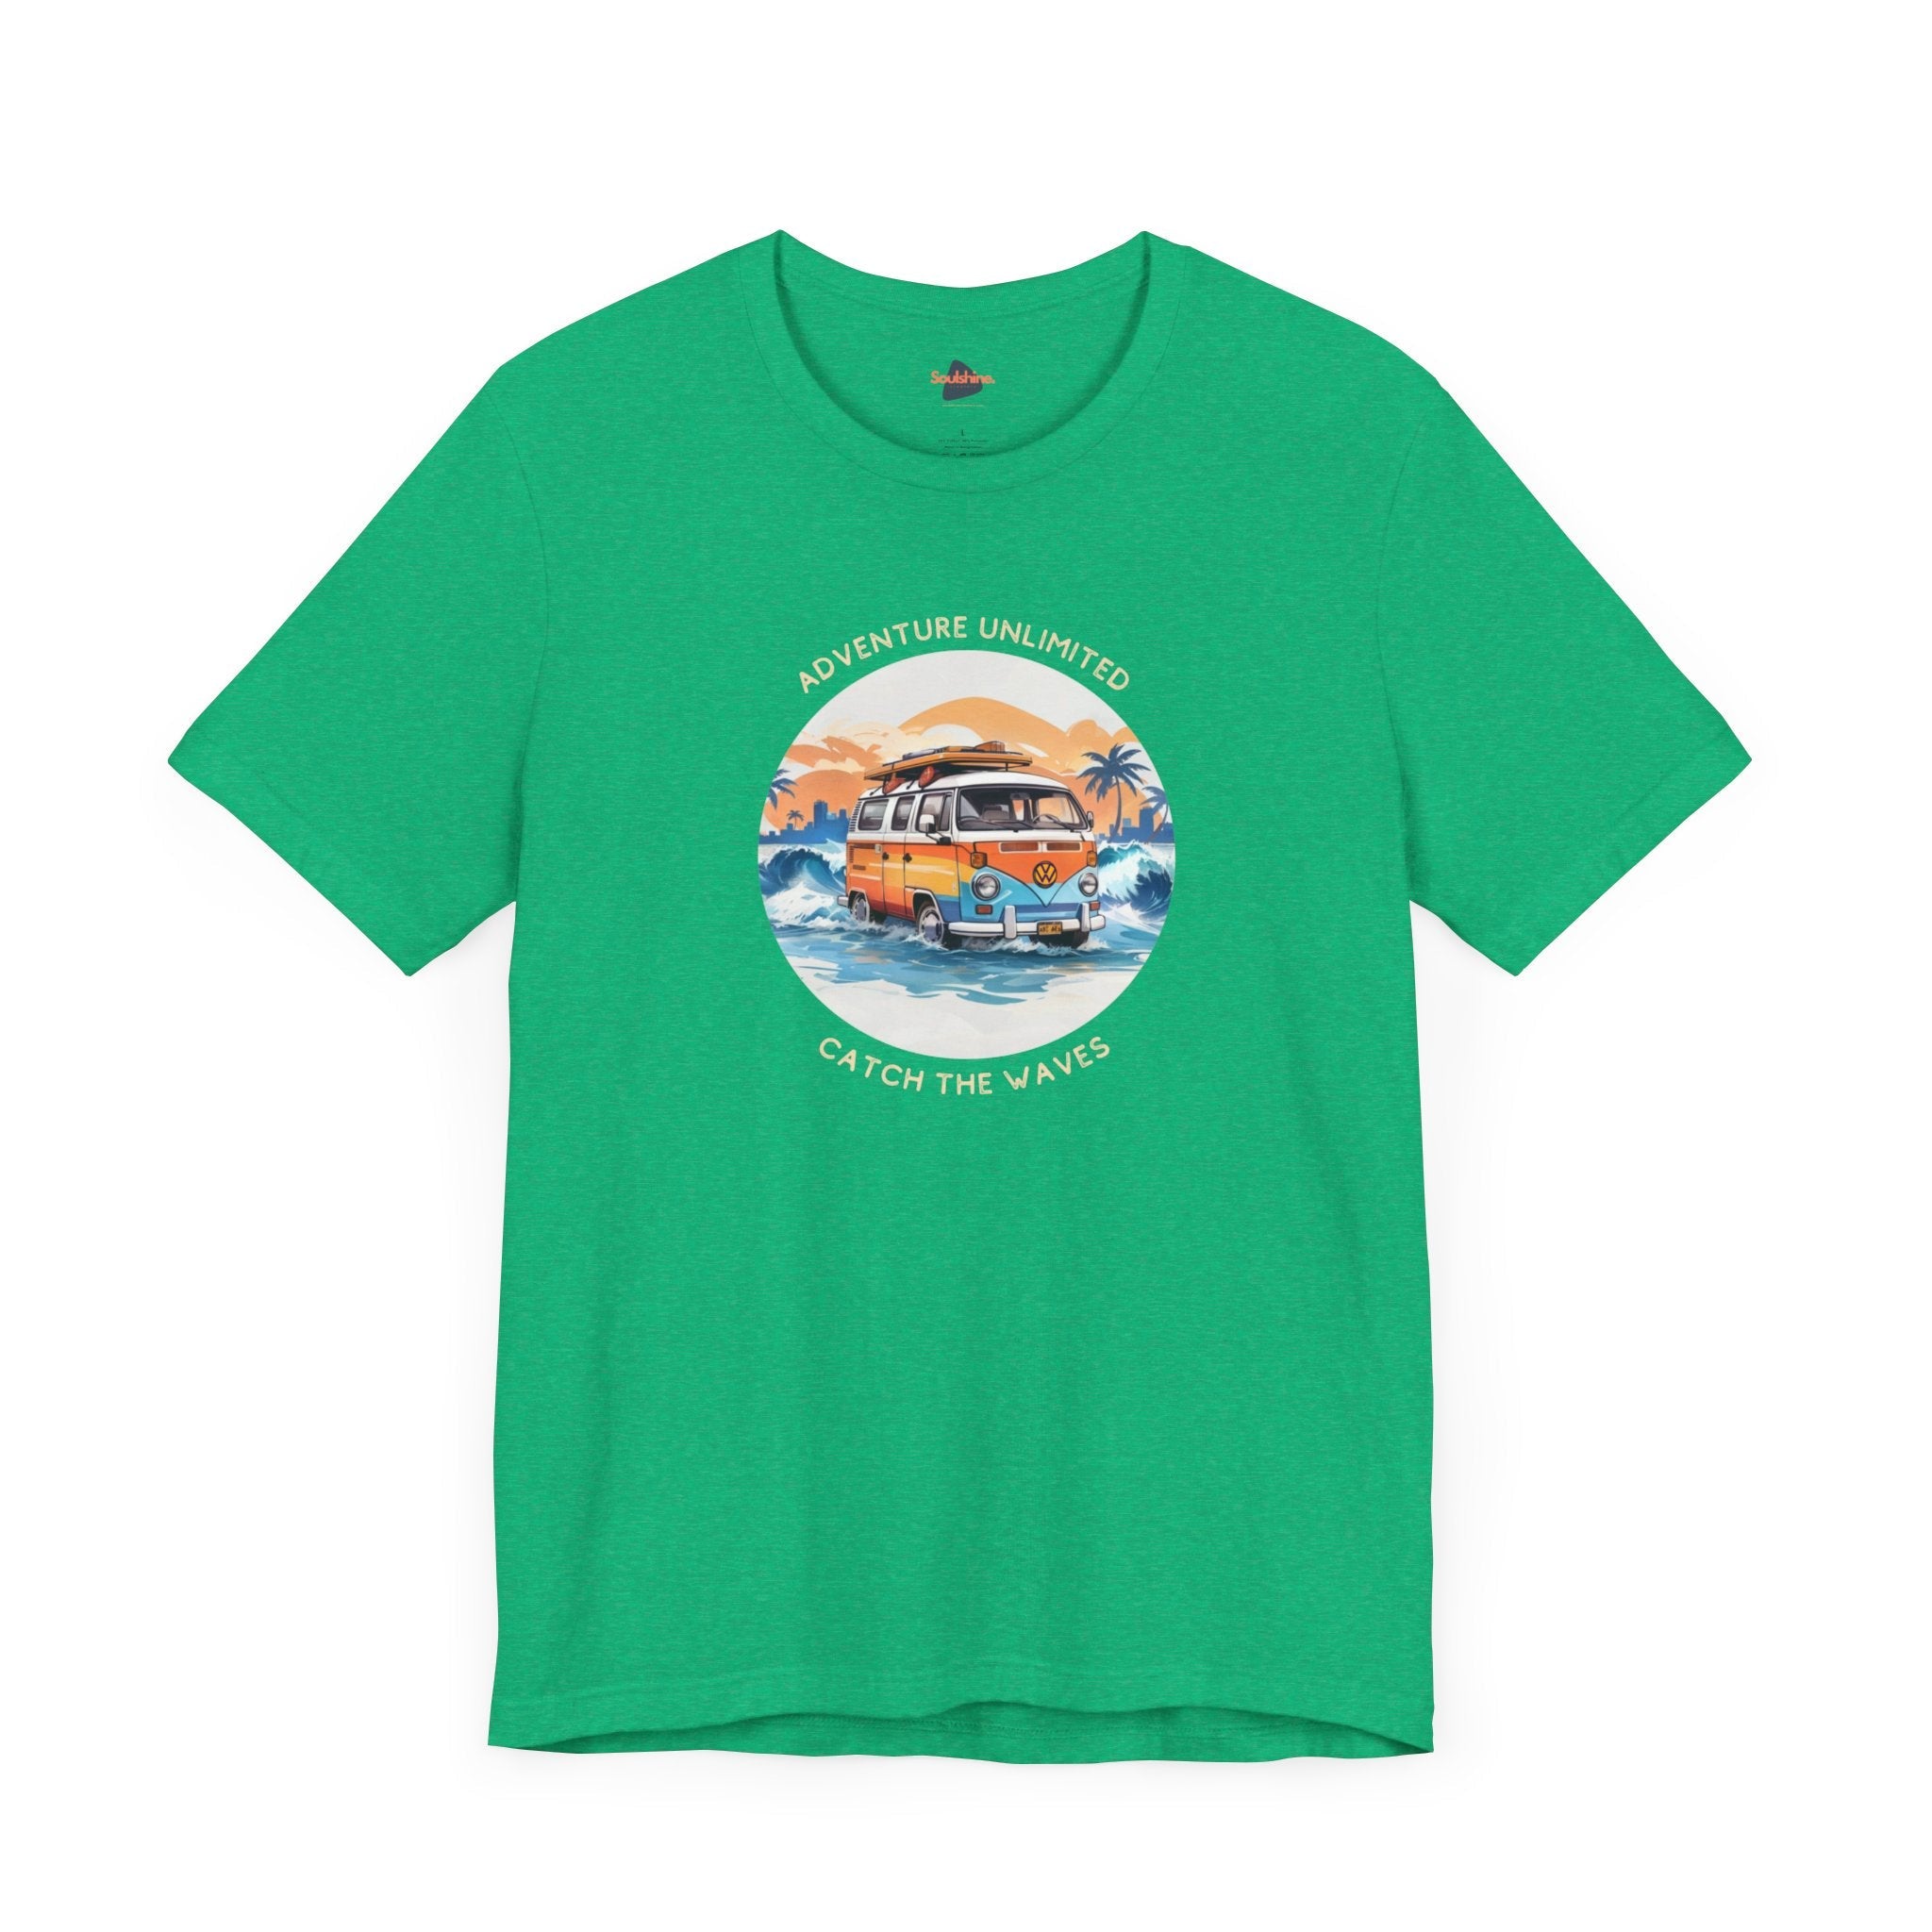 Adventure Unlimited green t-shirt with camper van on beach - direct-to-garment printed item